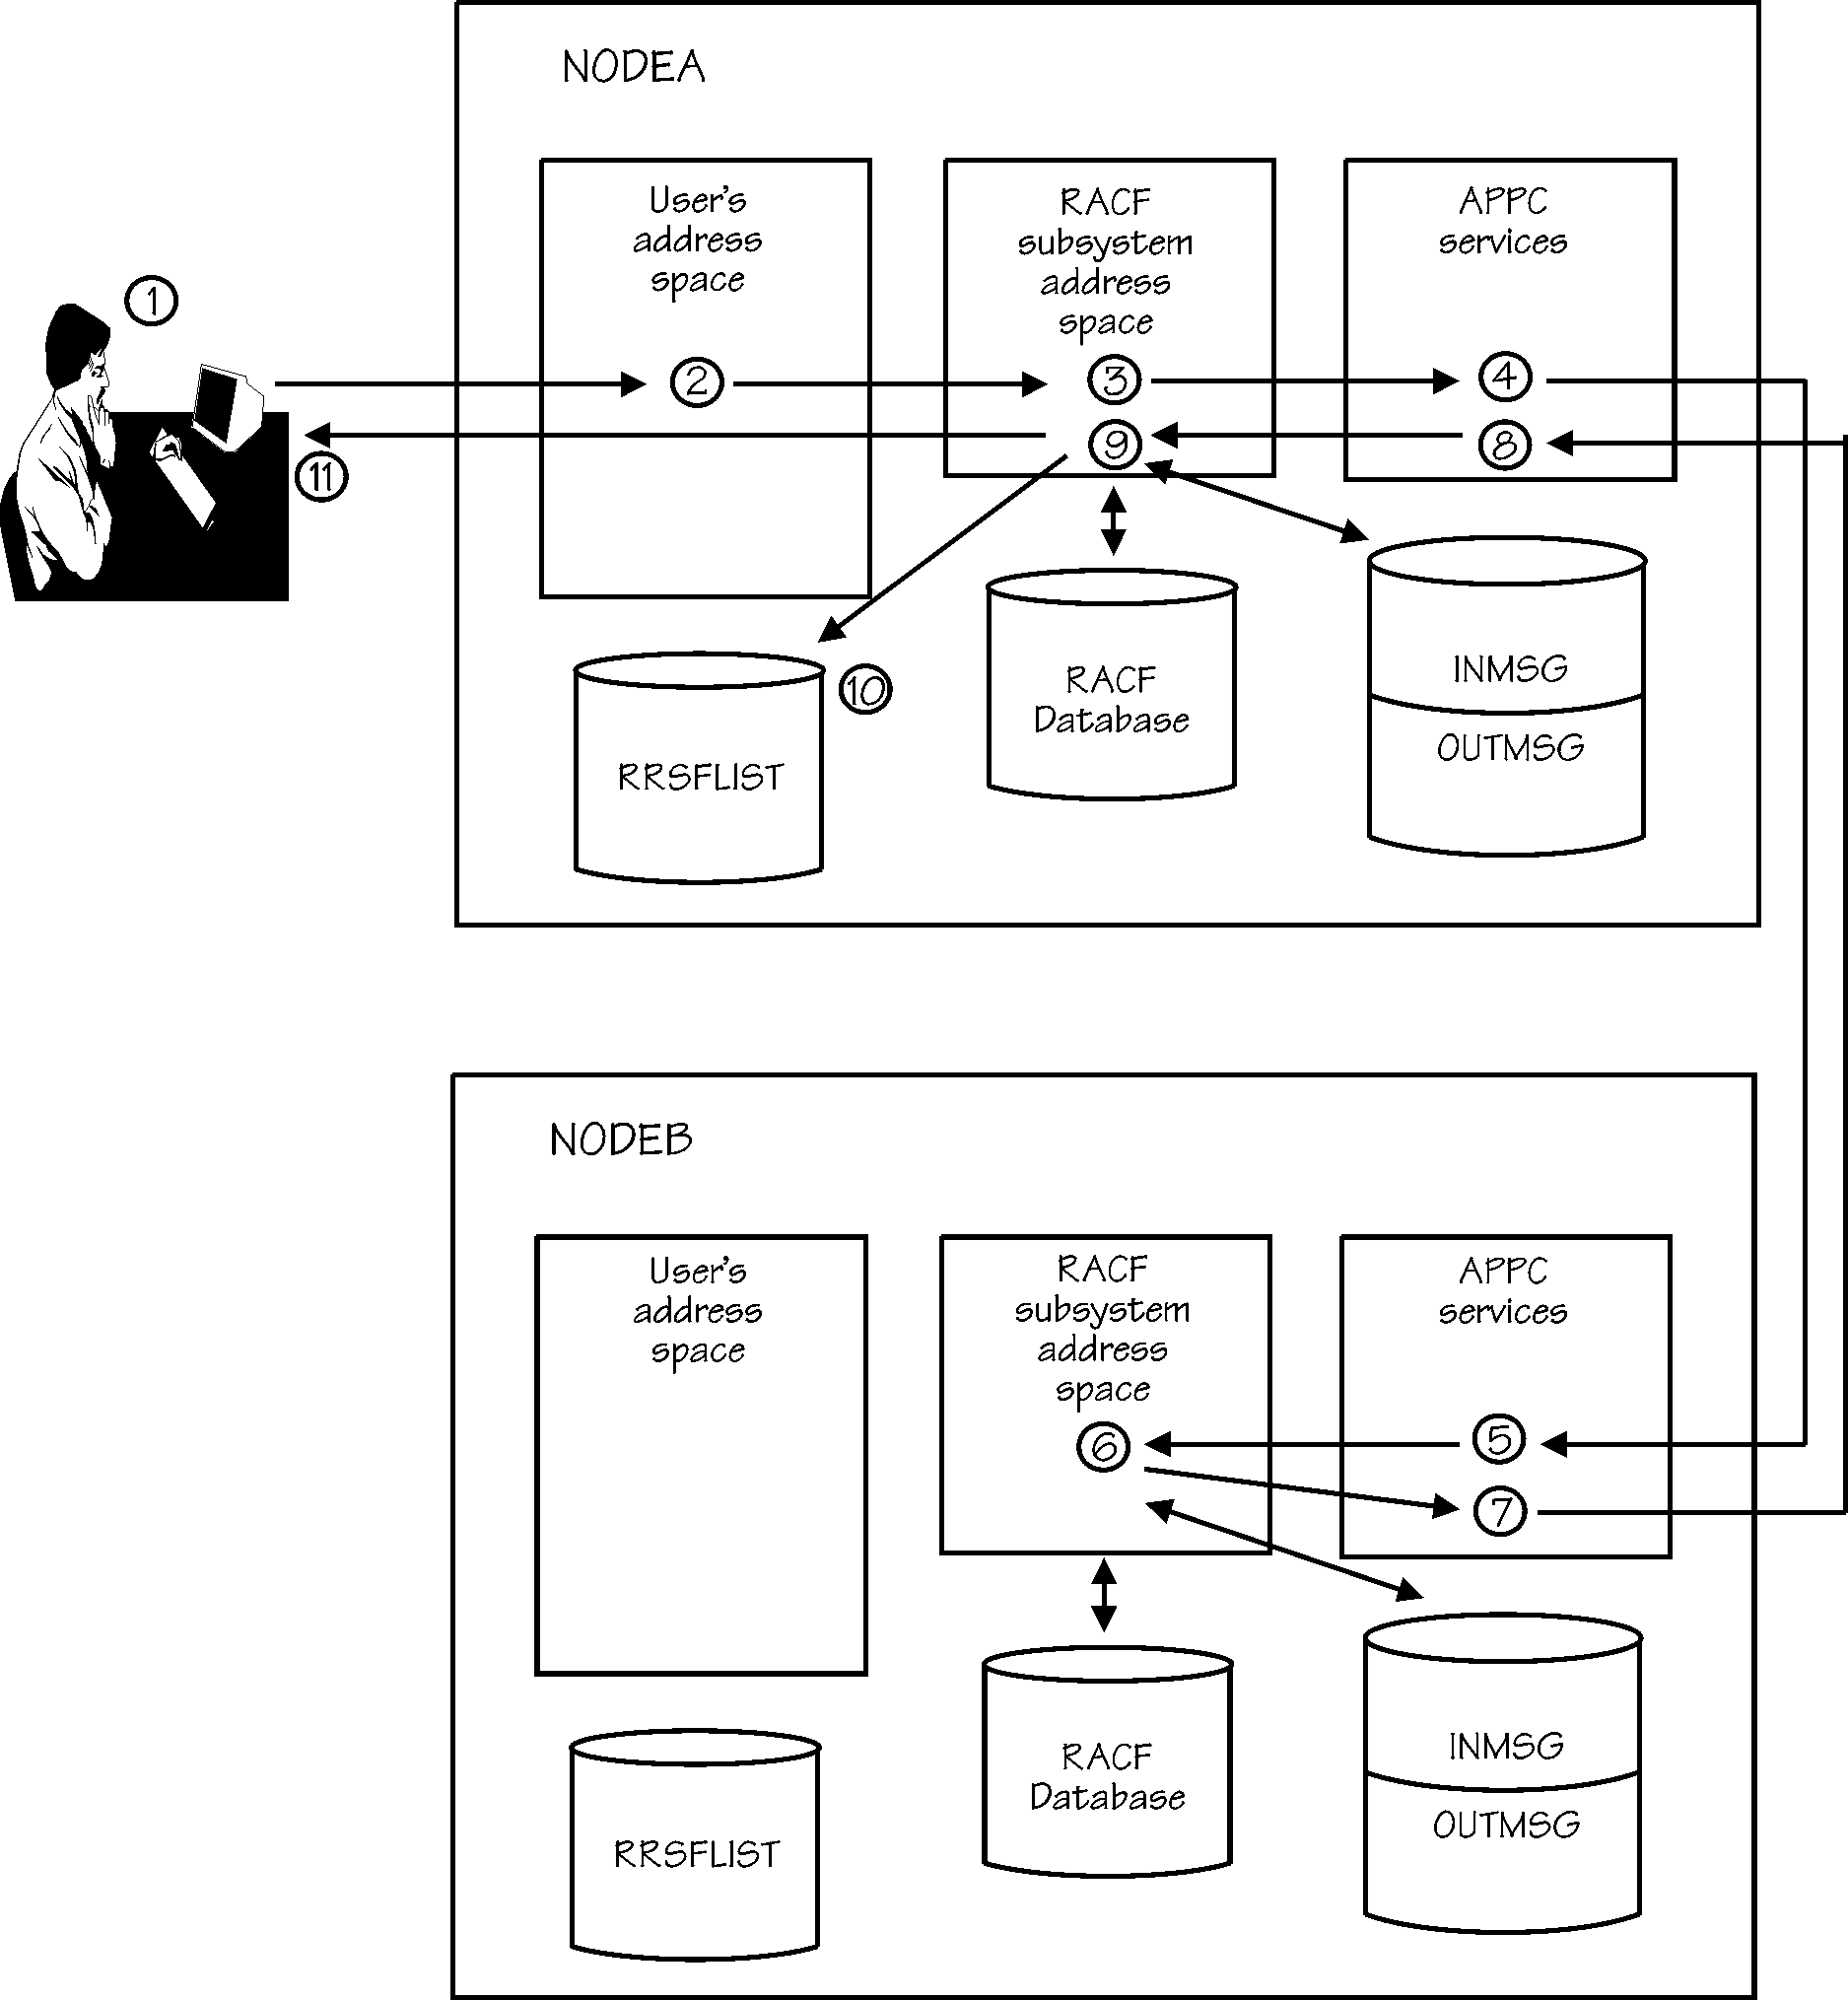 A directed command traveling through an RRSF network that uses APPC